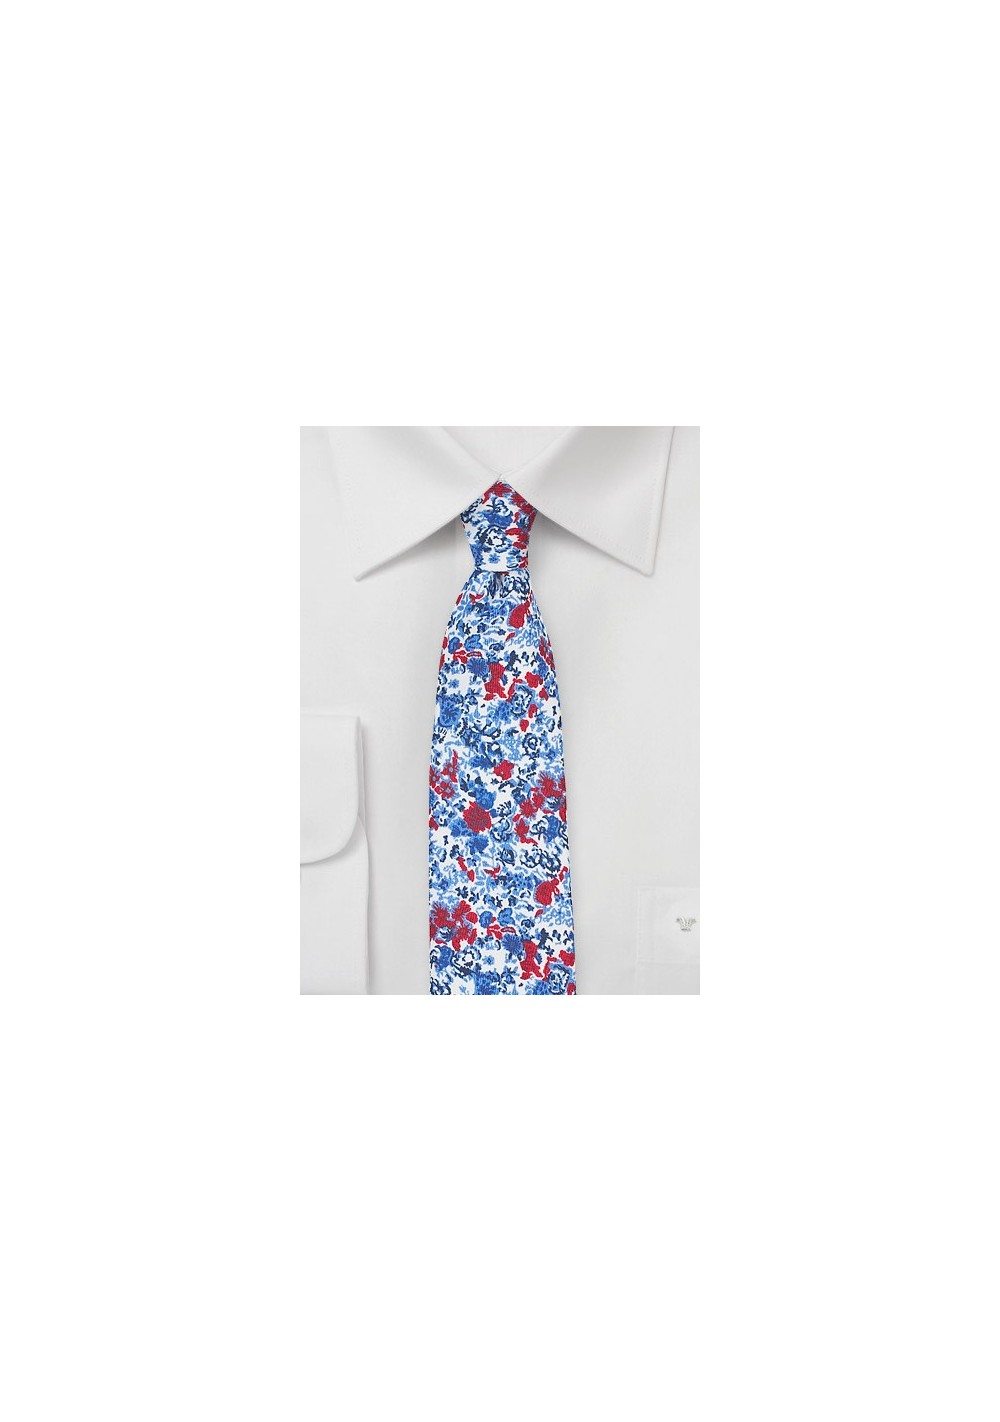 Floral Skinny Tie in Red and Blue